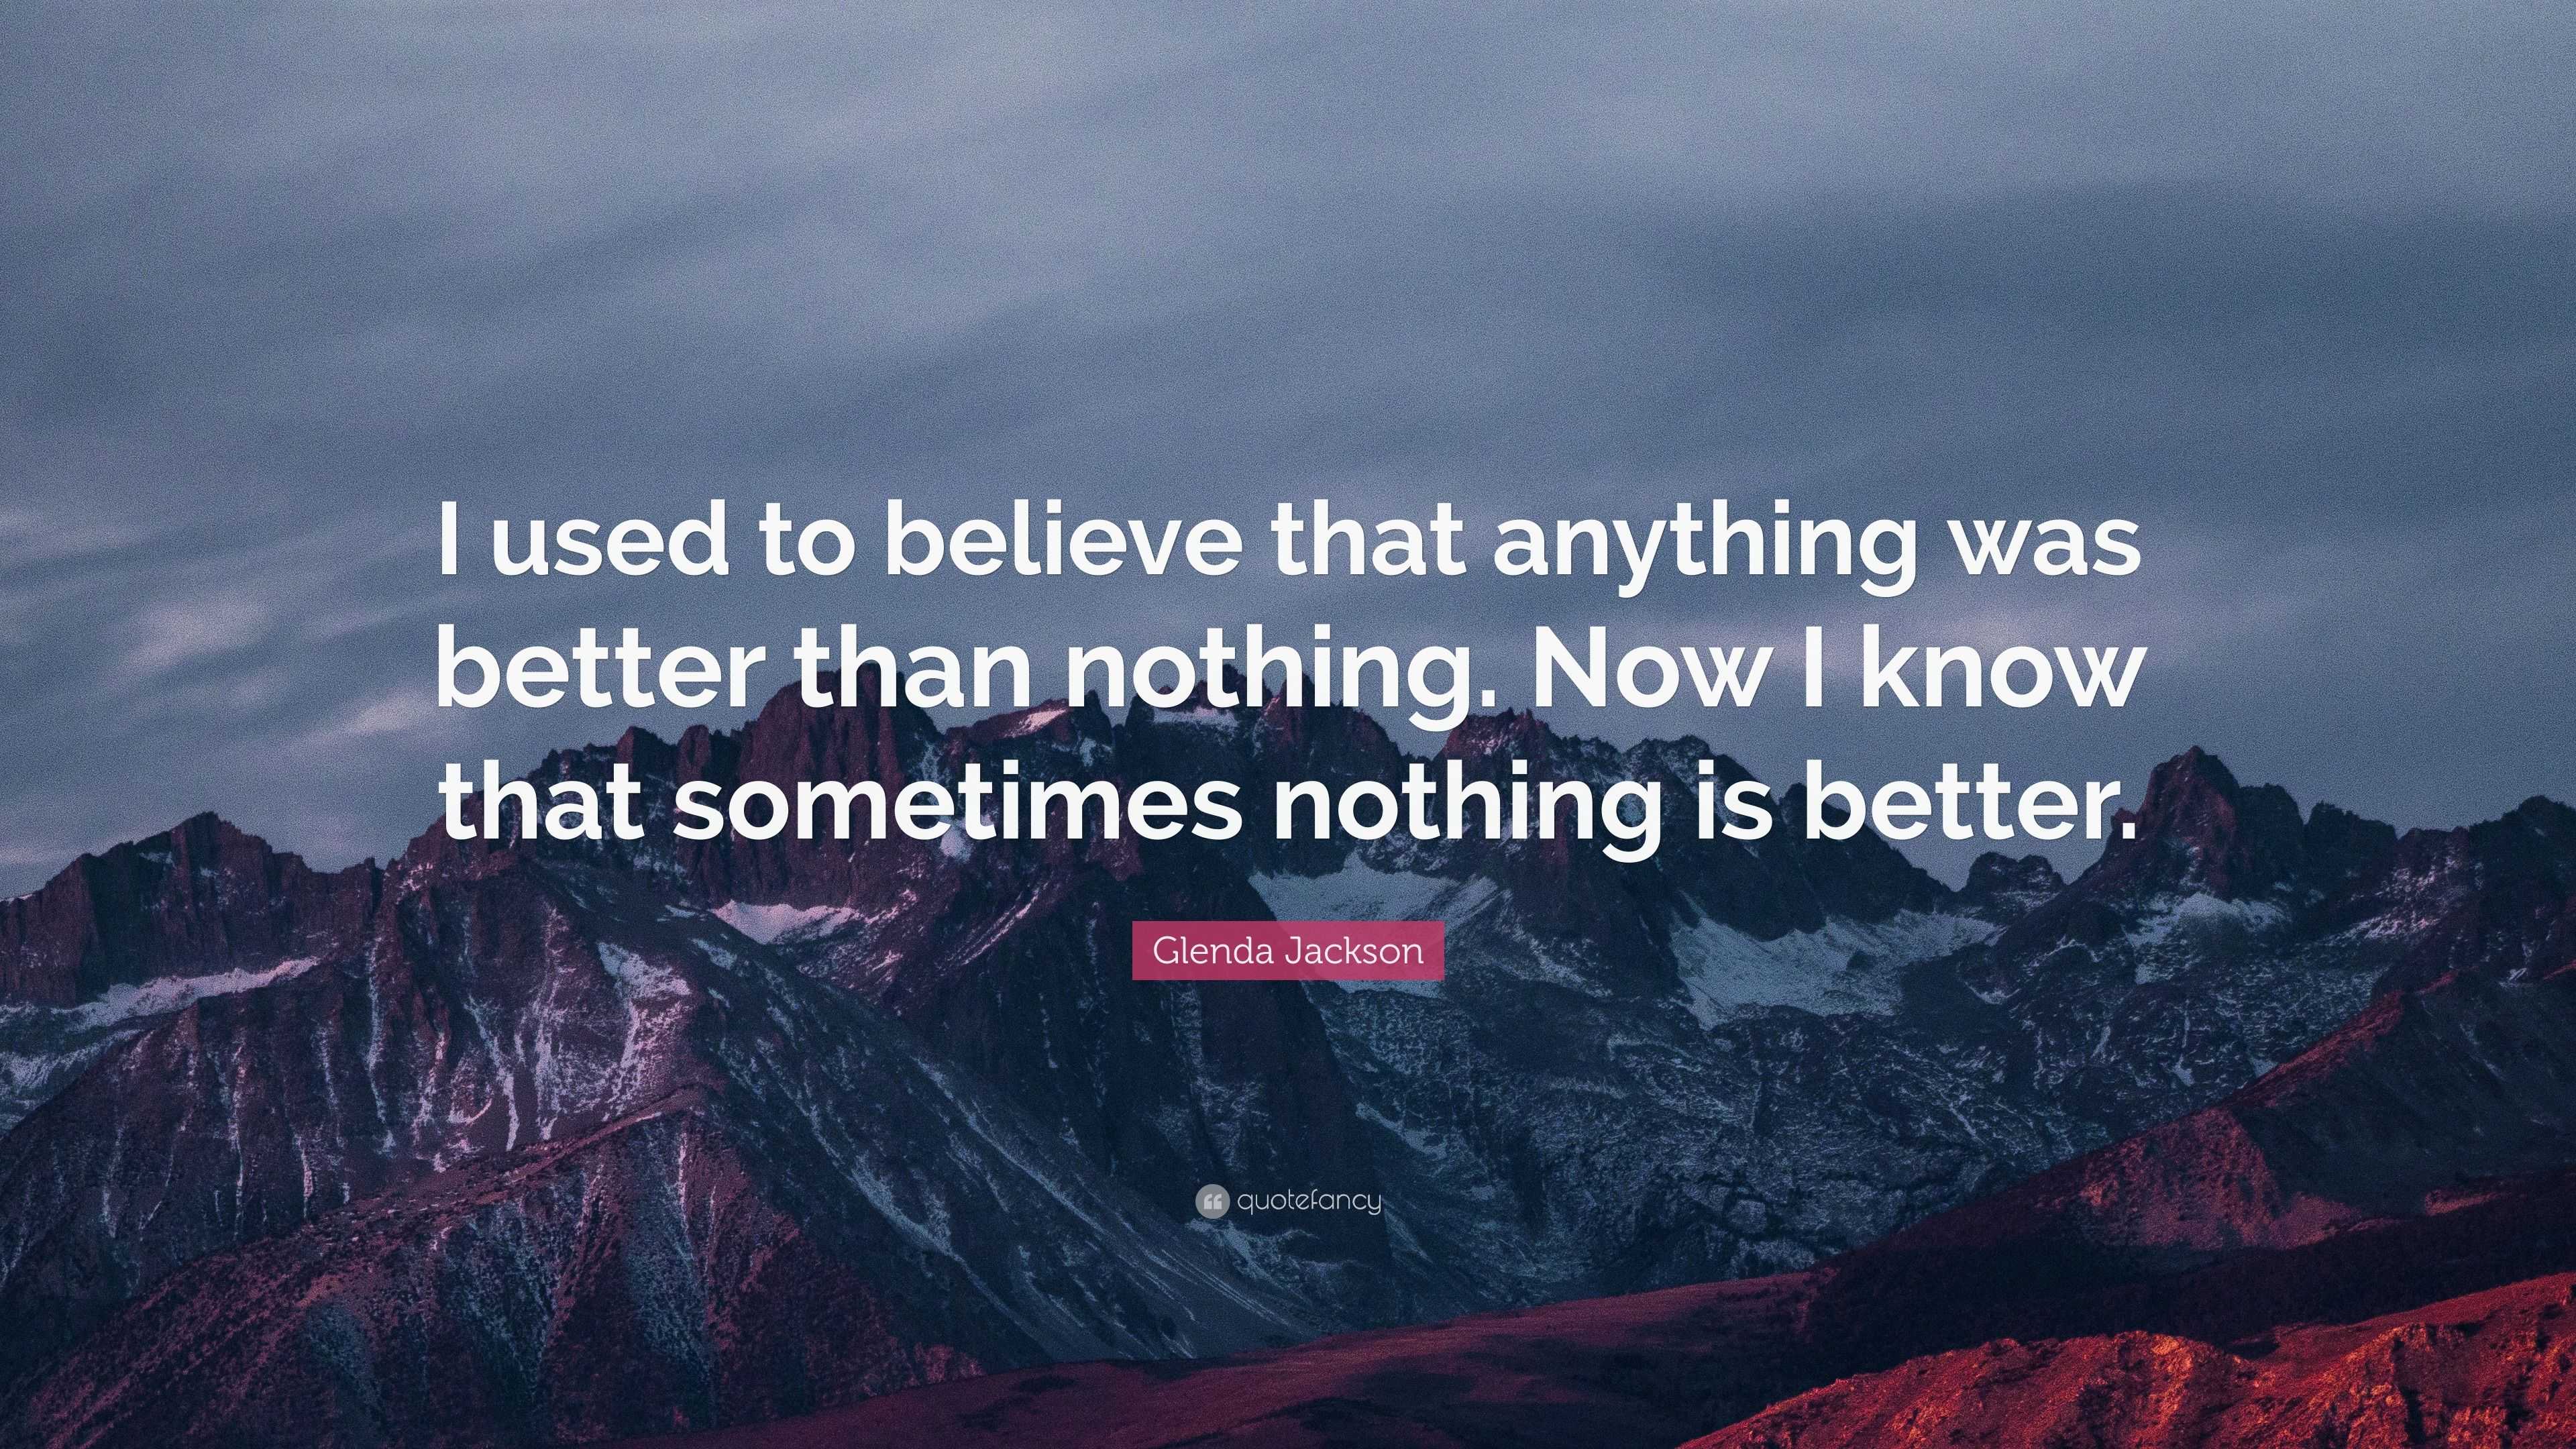 Glenda Jackson Quote: “I used to believe that anything was better than ...